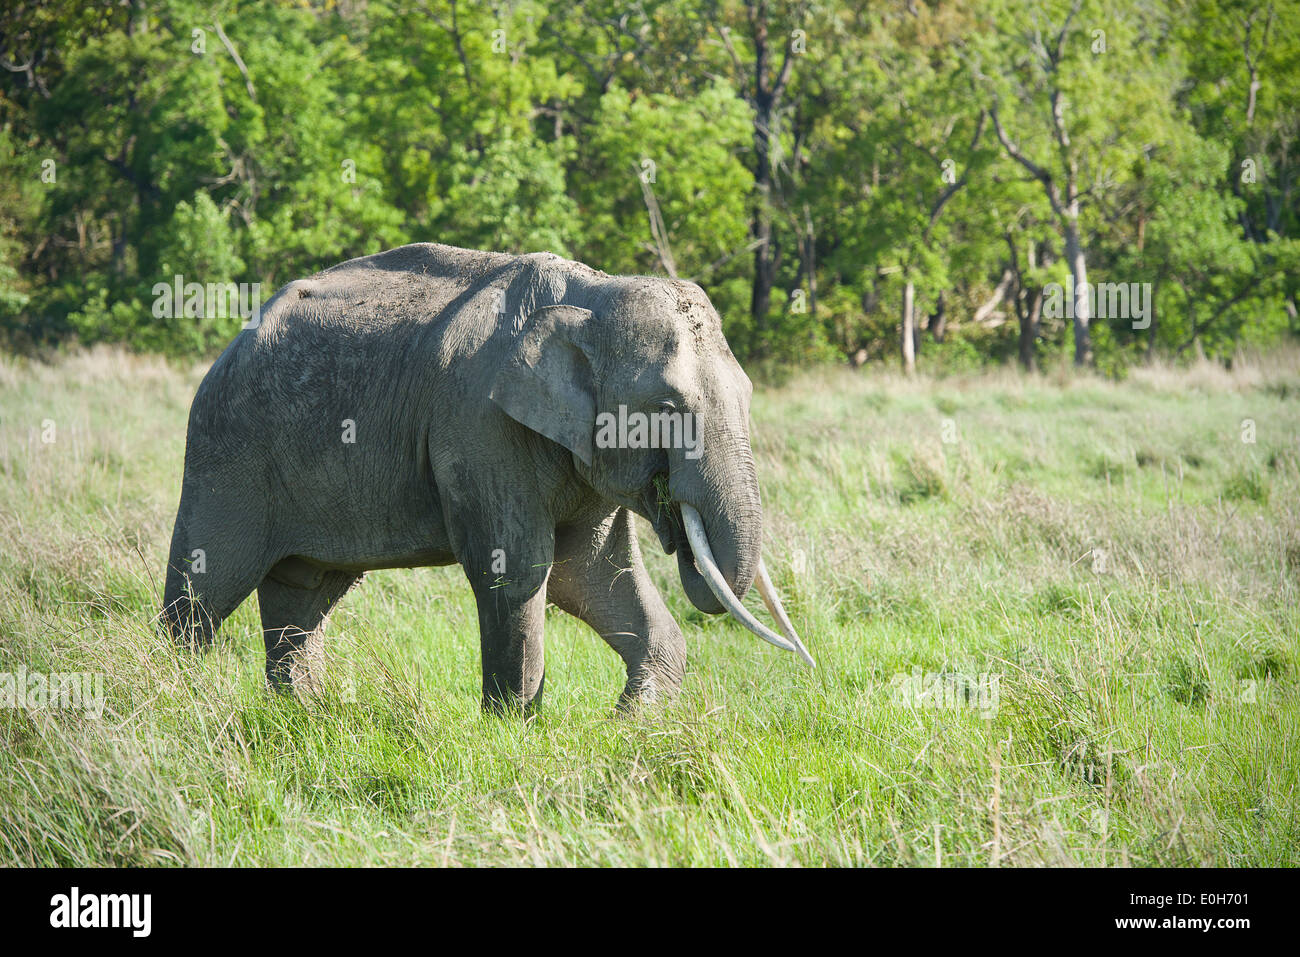 An Asiatic Elephant grazing on grass Stock Photo